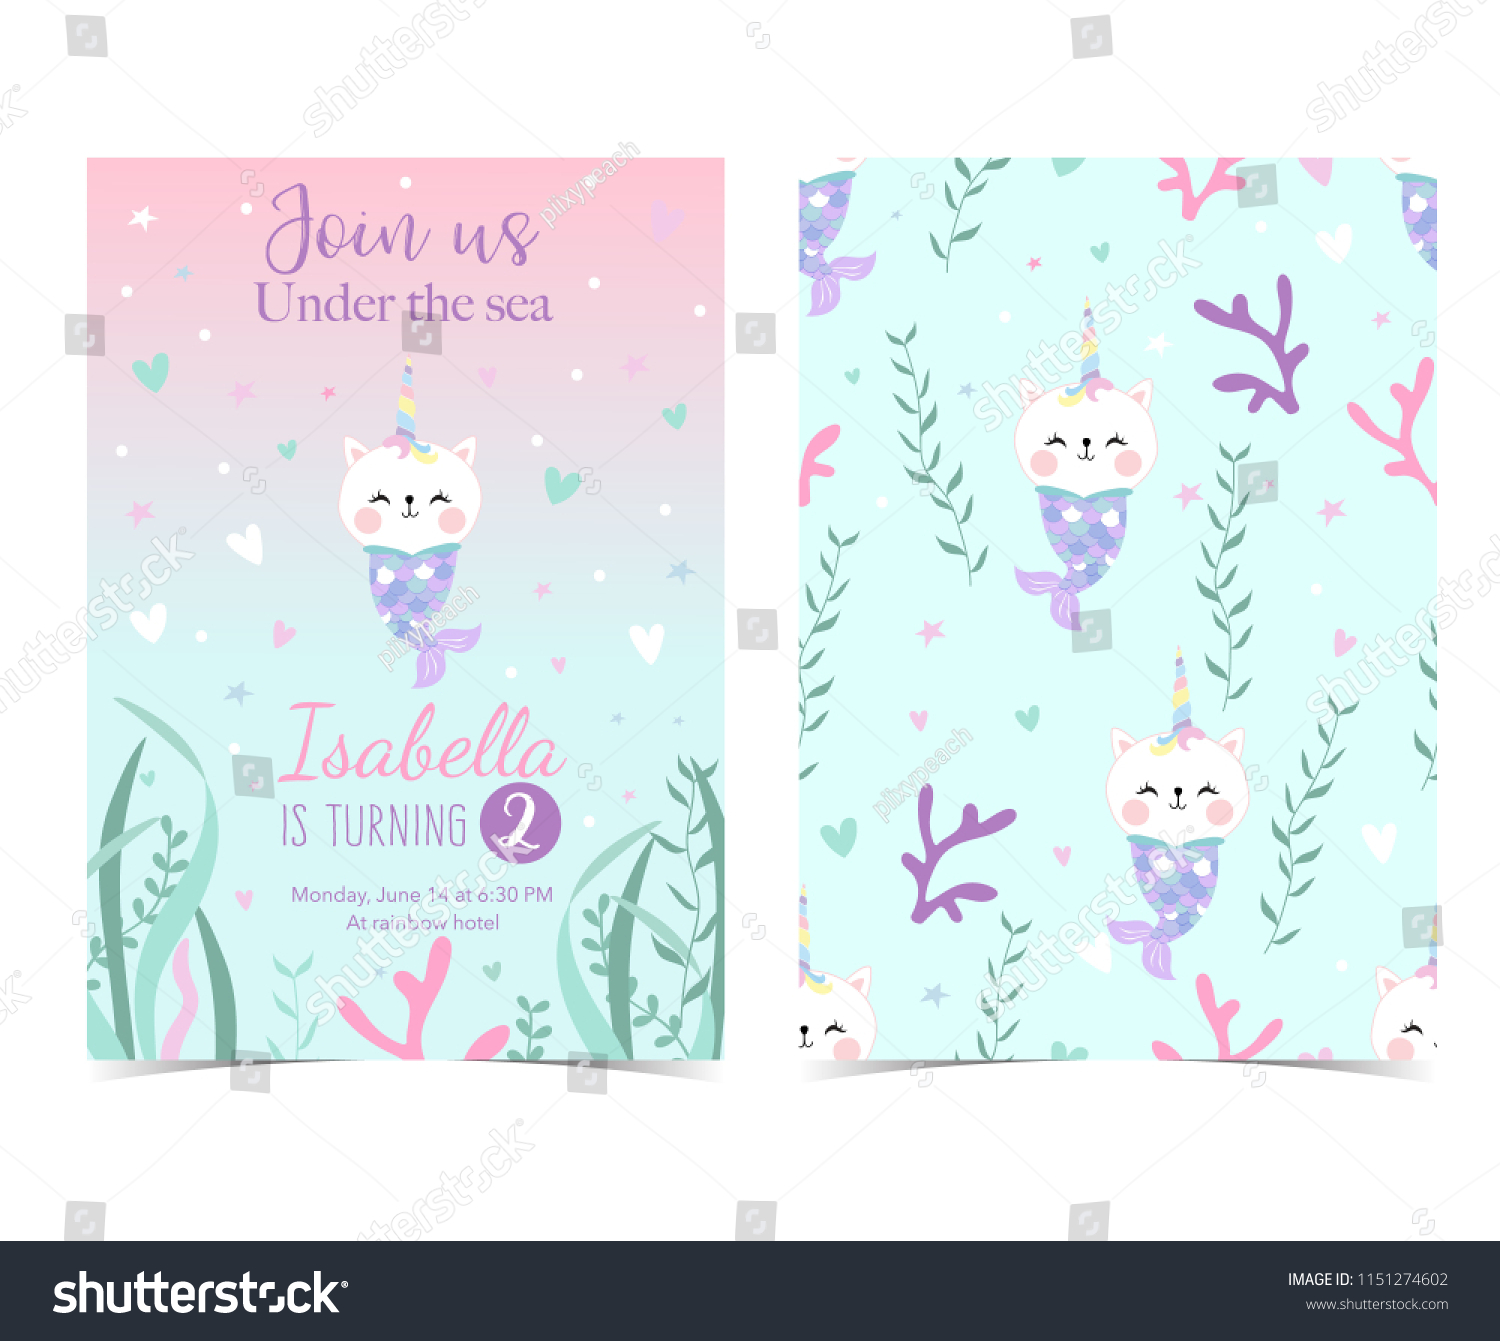 SVG of Hand drawn cute card with mermaid,caticorn,squid,coral and sea horse svg